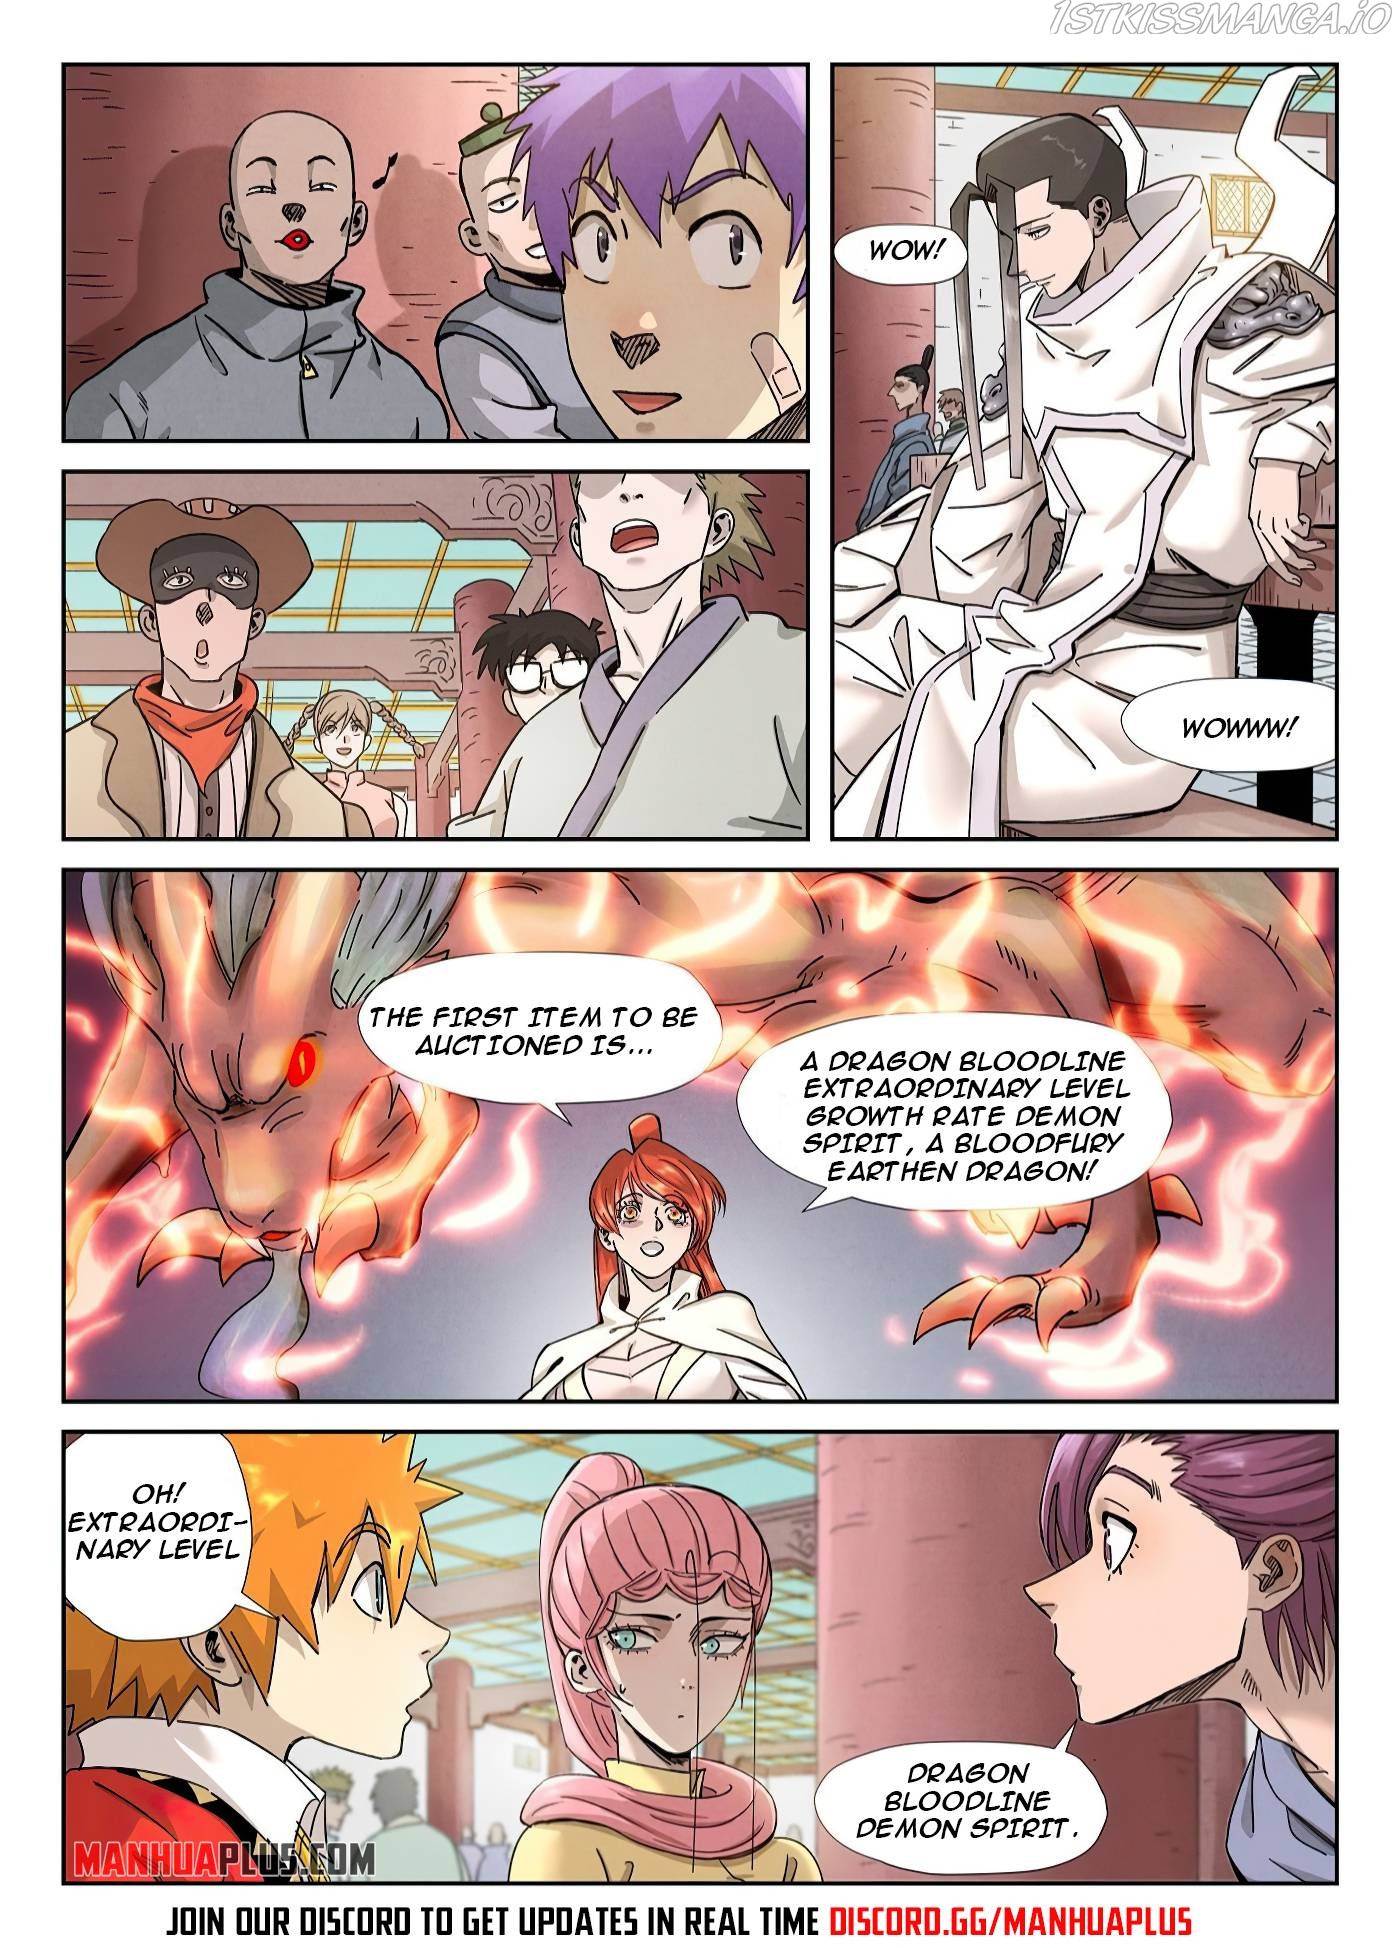 Tales of Demons and Gods Manhua Chapter 336.1 - Page 6